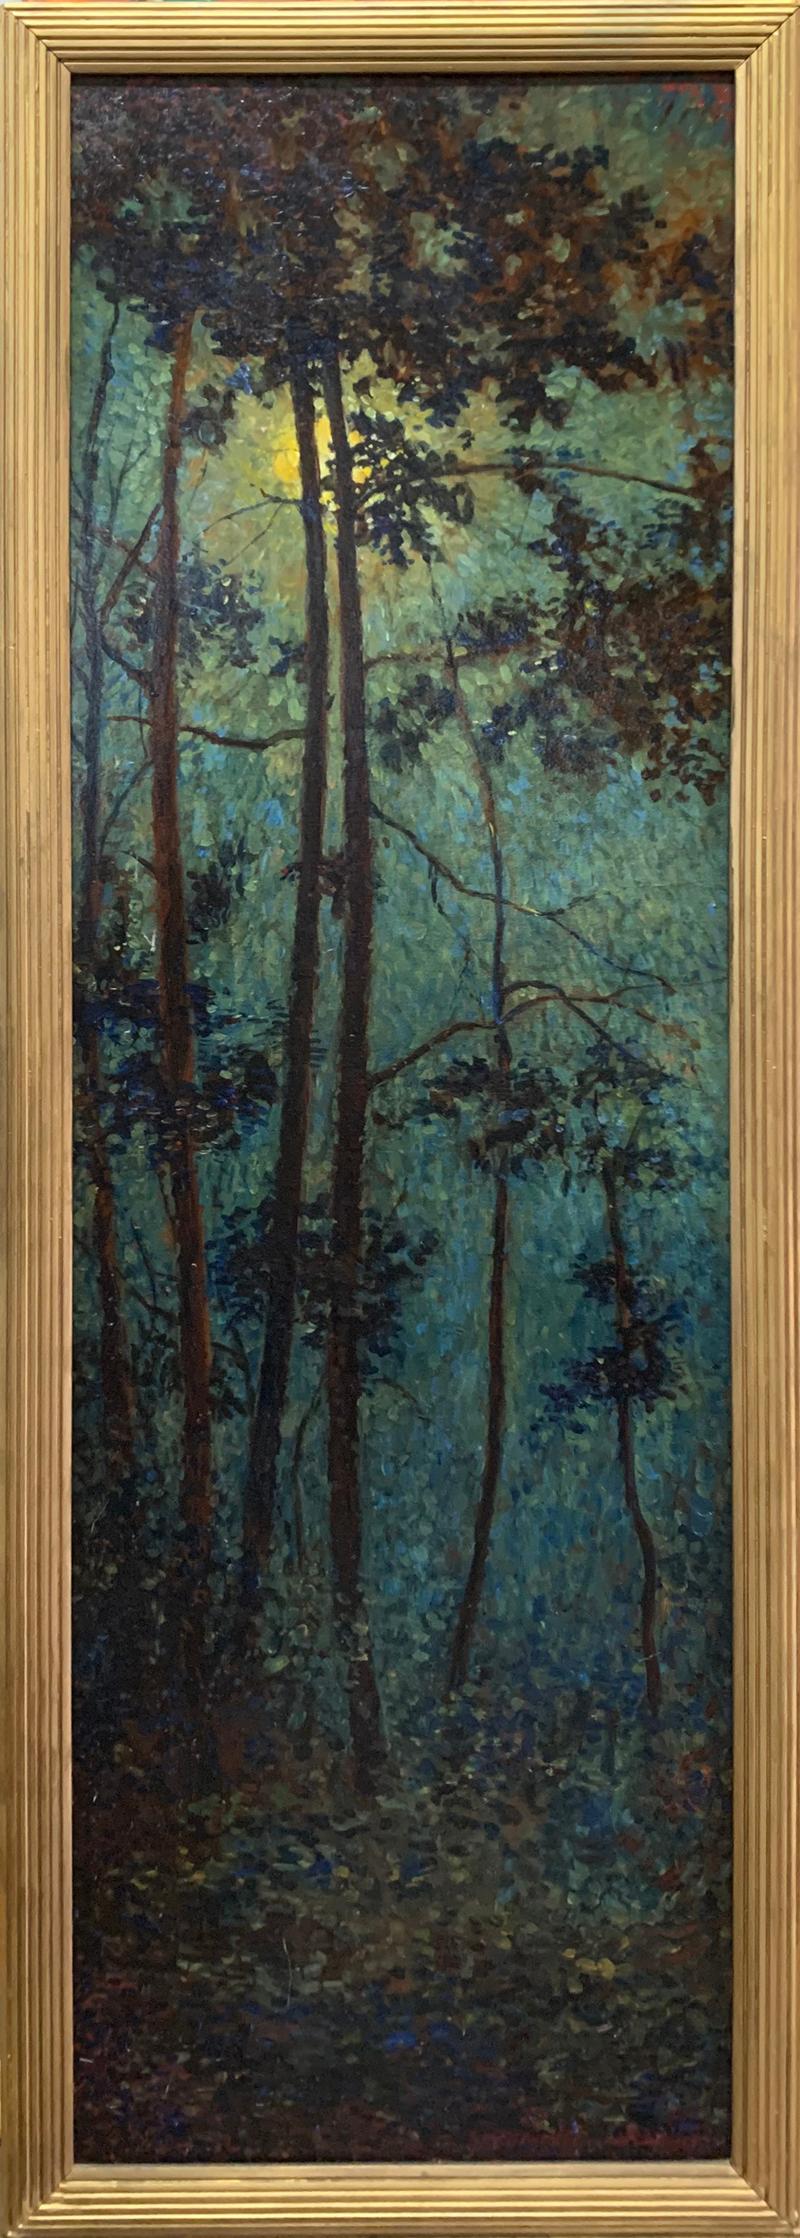 Wharton Esherick Landscape Painting - Forest Scene, American Impressionist landscape painting, rare find, signed